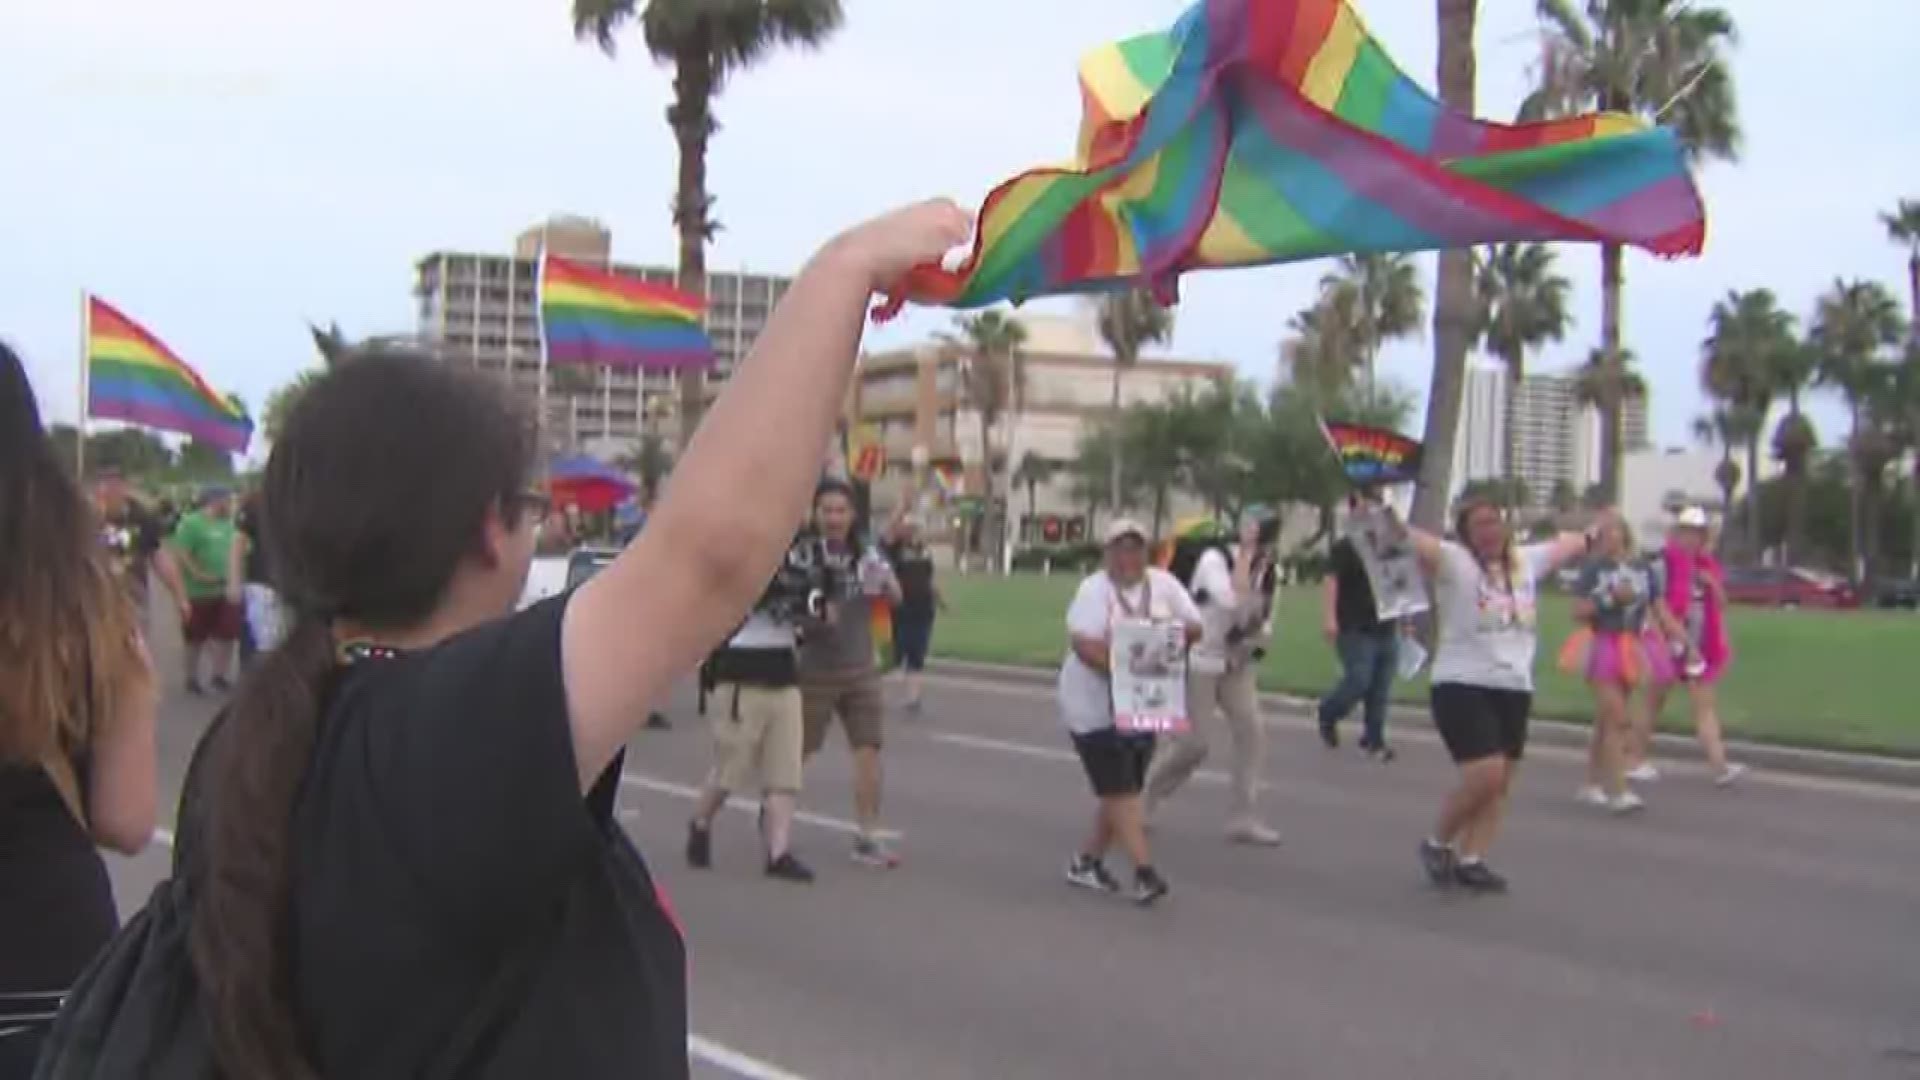 LGBTQ+ advocates in the Coastal Bend are speaking out against a comment made by a Corpus Christi priest earlier this week.